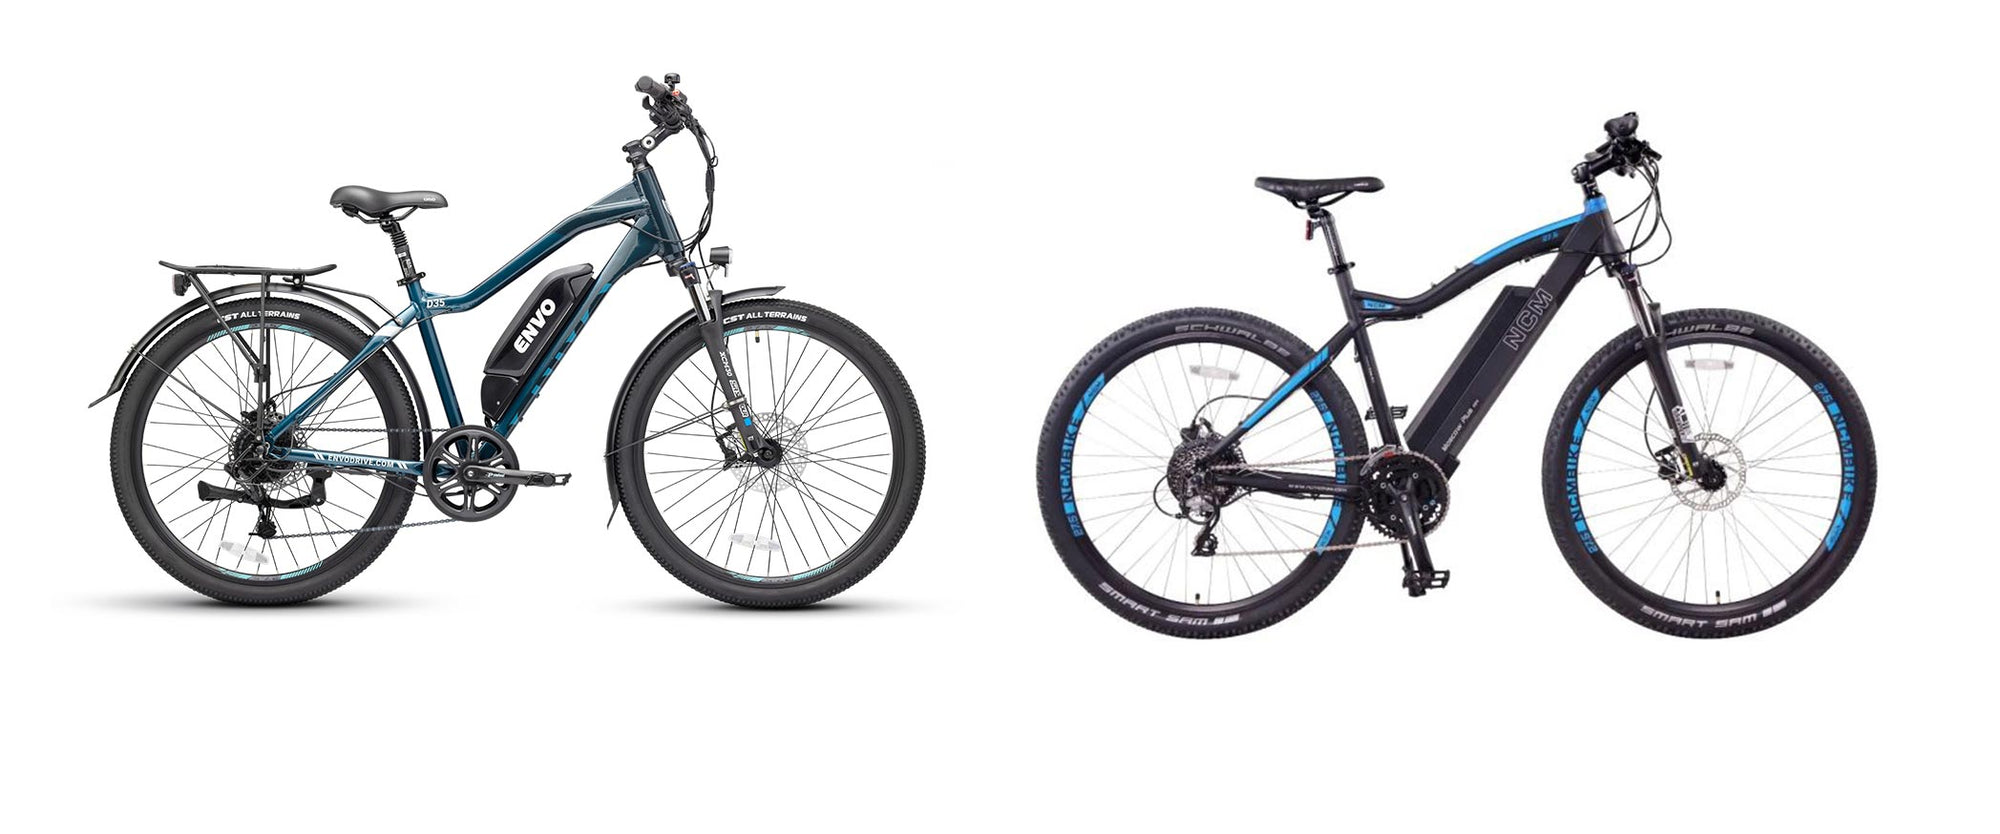 ENVO D35 Electric Bicycle Vs. NCM Moscow Plus Electric Bicycle | EBIKEBC